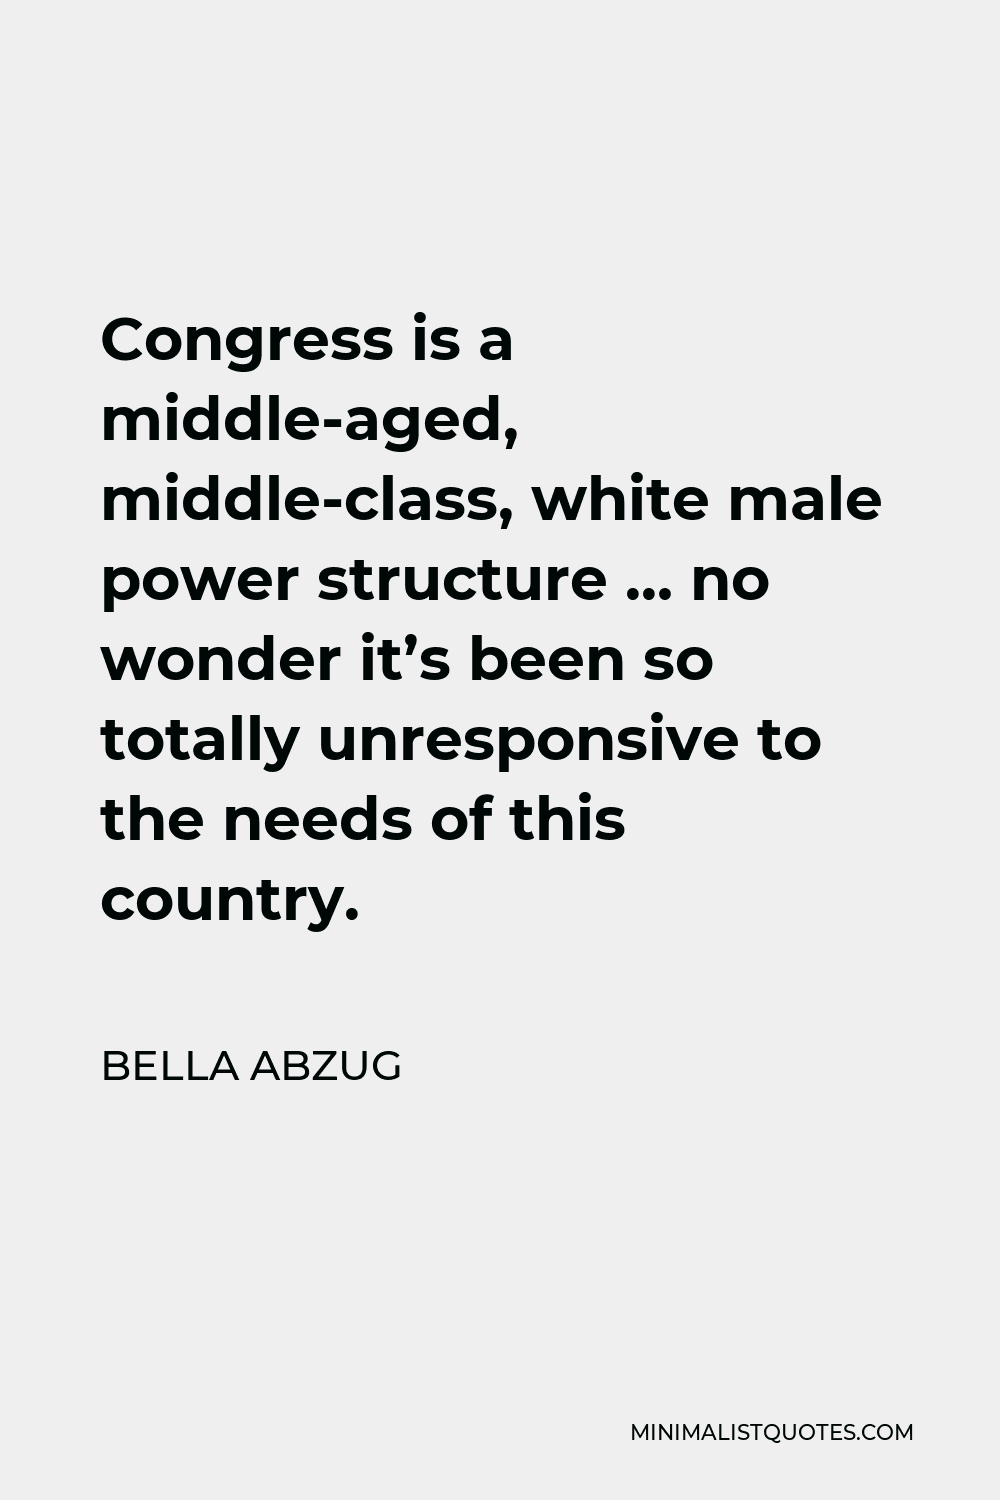 Bella Abzug Quote - Congress is a middle-aged, middle-class, white male power structure … no wonder it’s been so totally unresponsive to the needs of this country.